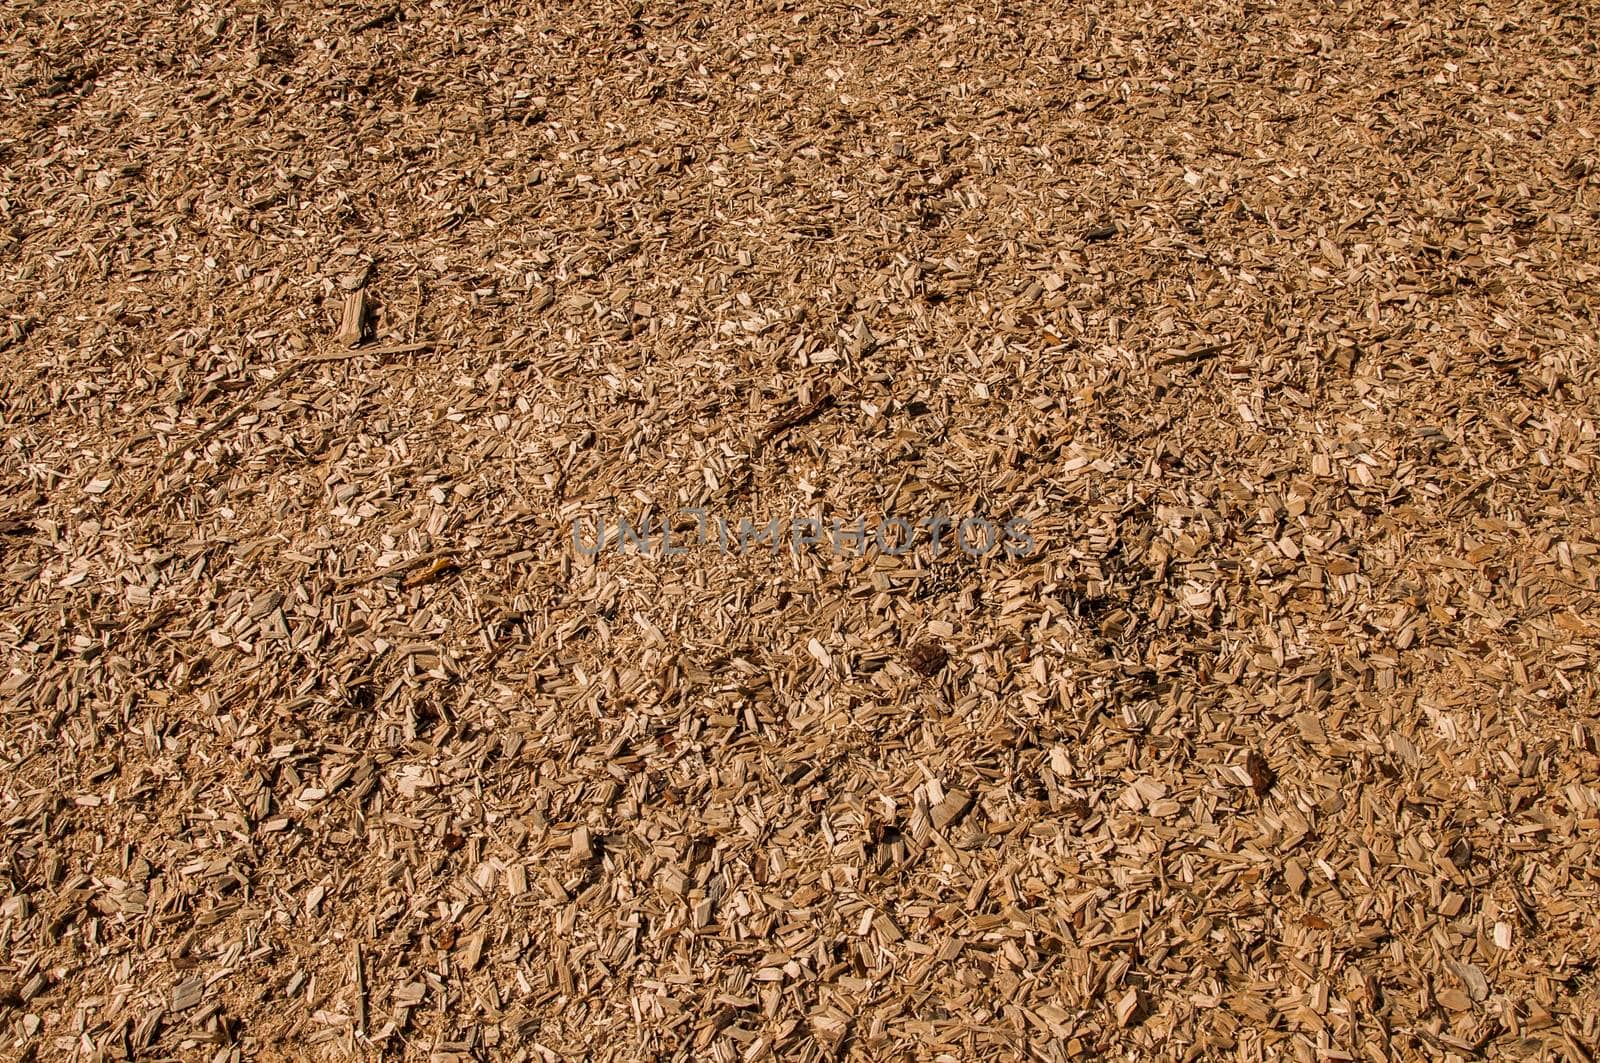 Alternative fuel, ecological fuel, biofuel Charcoal sawdust, sawdust close-up background. Sawdust texture